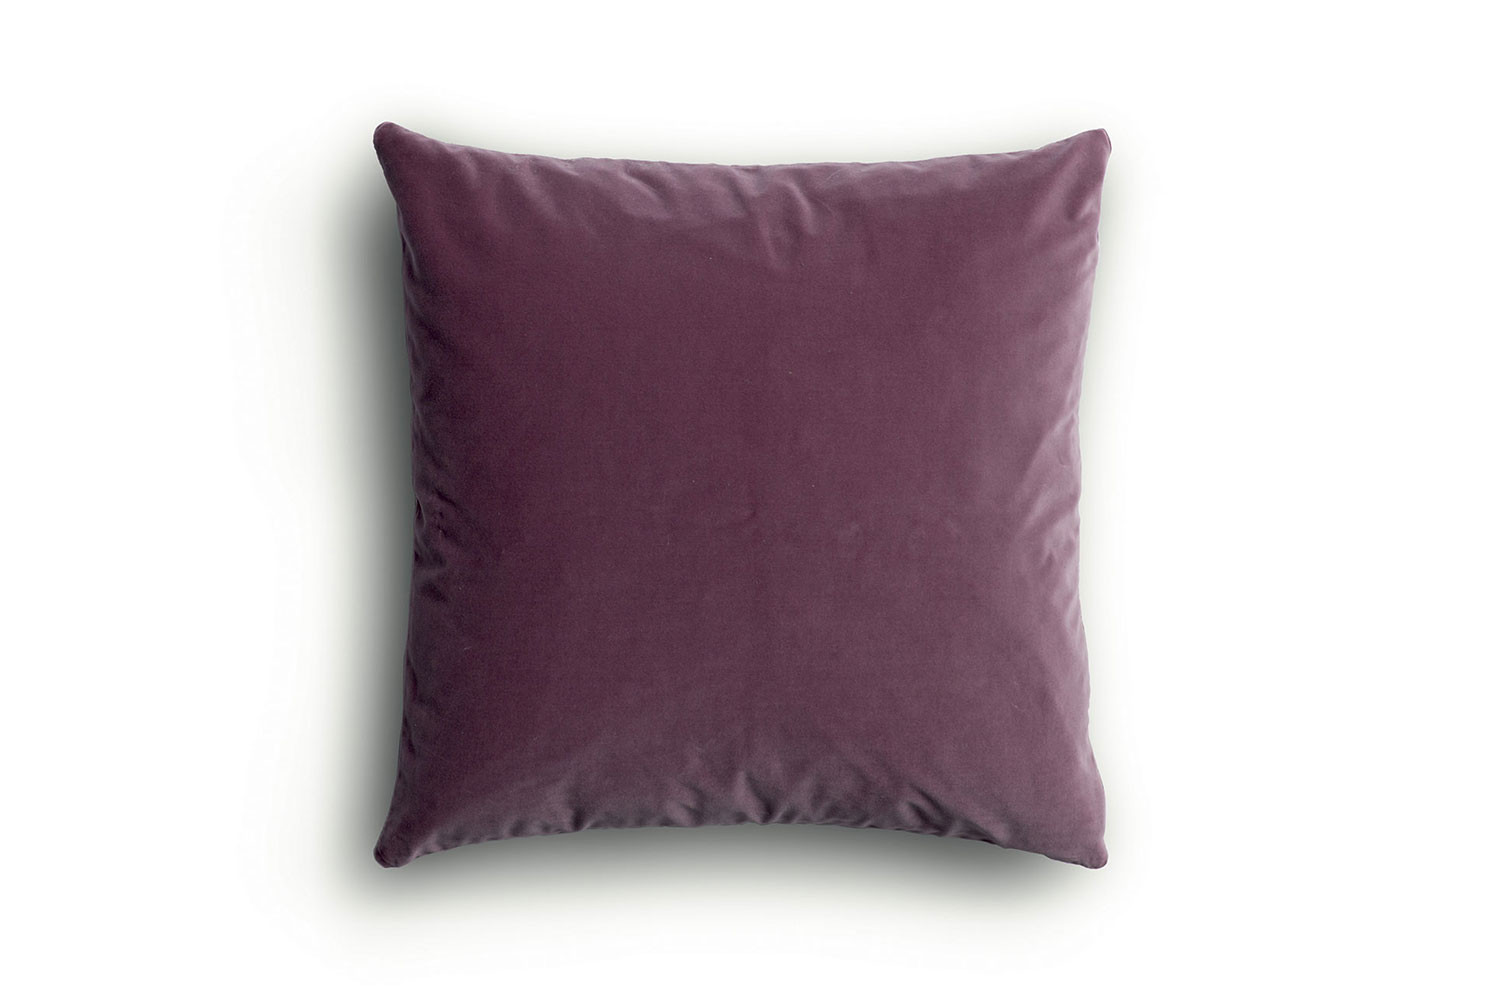 Scatter cushion C 60x60 cm with polyester filled pads